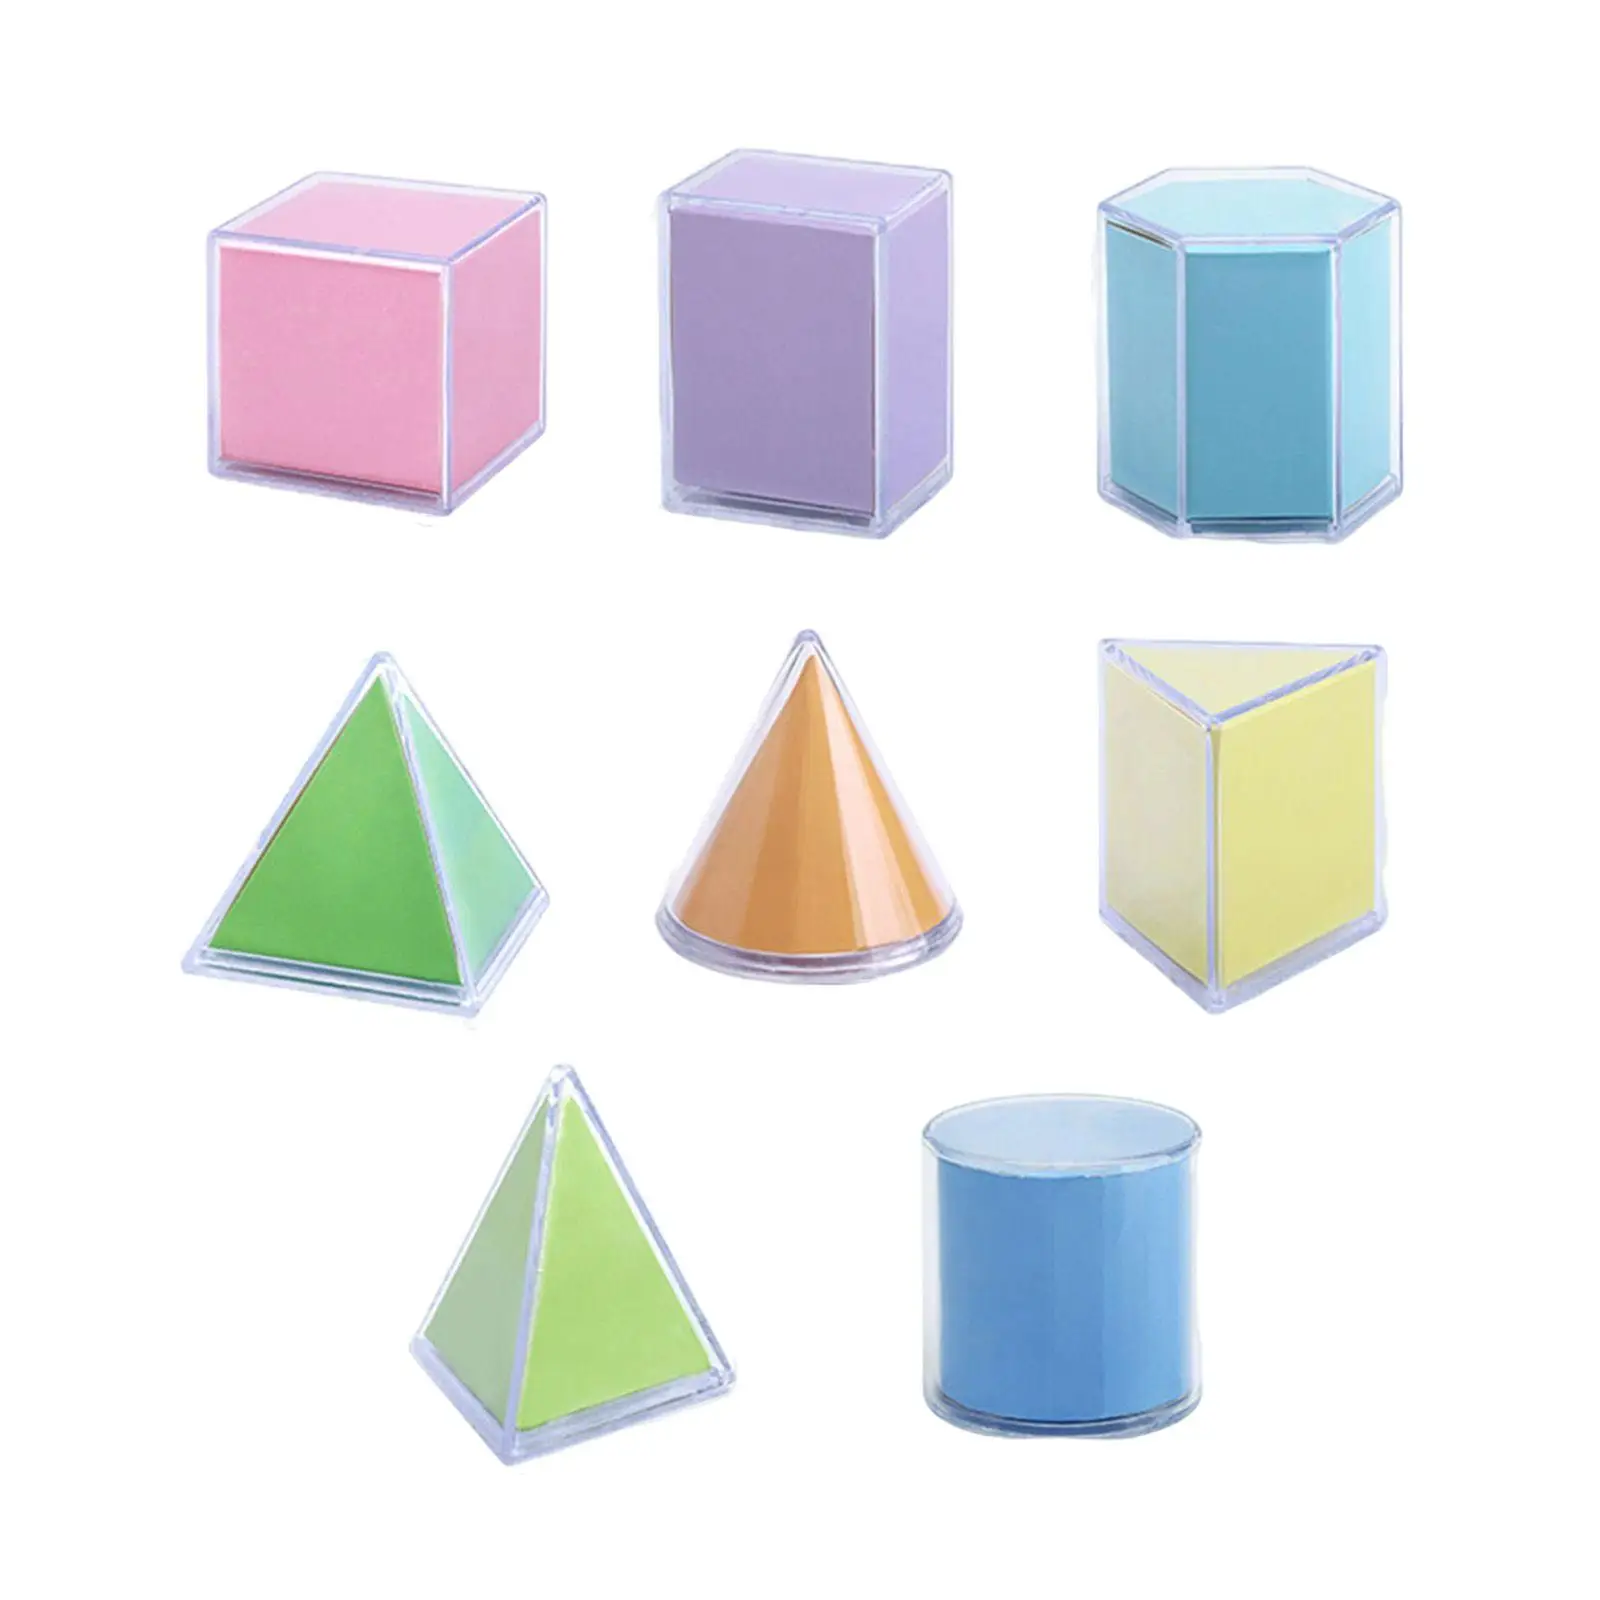 8x Geometric Shapes Blocks Montessori Toys Shape Sorter Sorting Toy Stacking Game Educational Toy Math Toys for Ages 2+ Babies